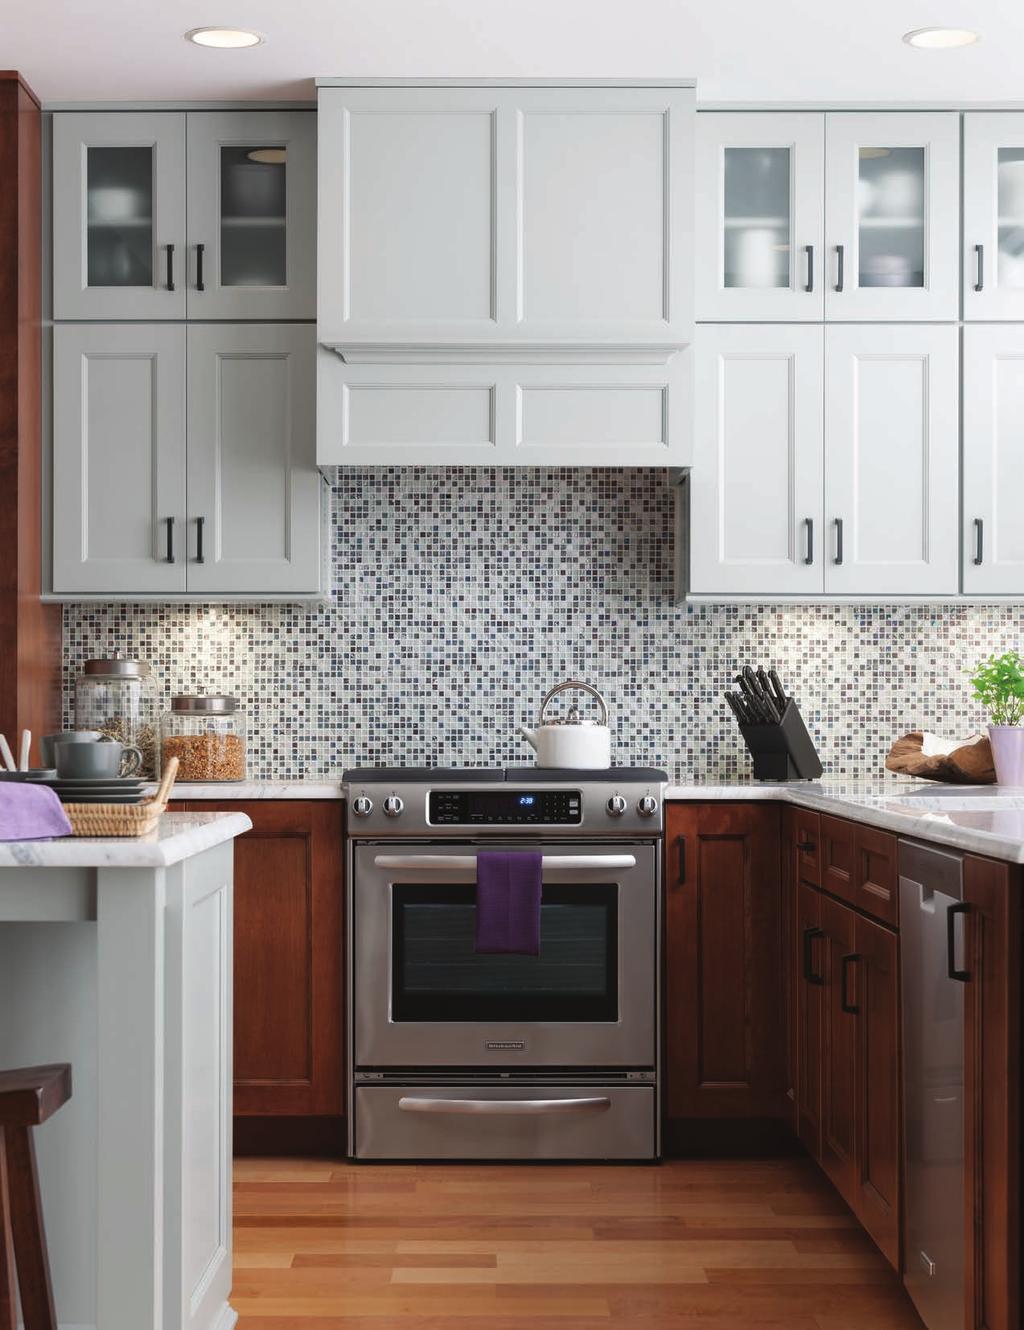 Fit your budget. Get the look you want at a price you can afford. D DELUXE Deluxe offers the ability to modify your cabinets the way you want.